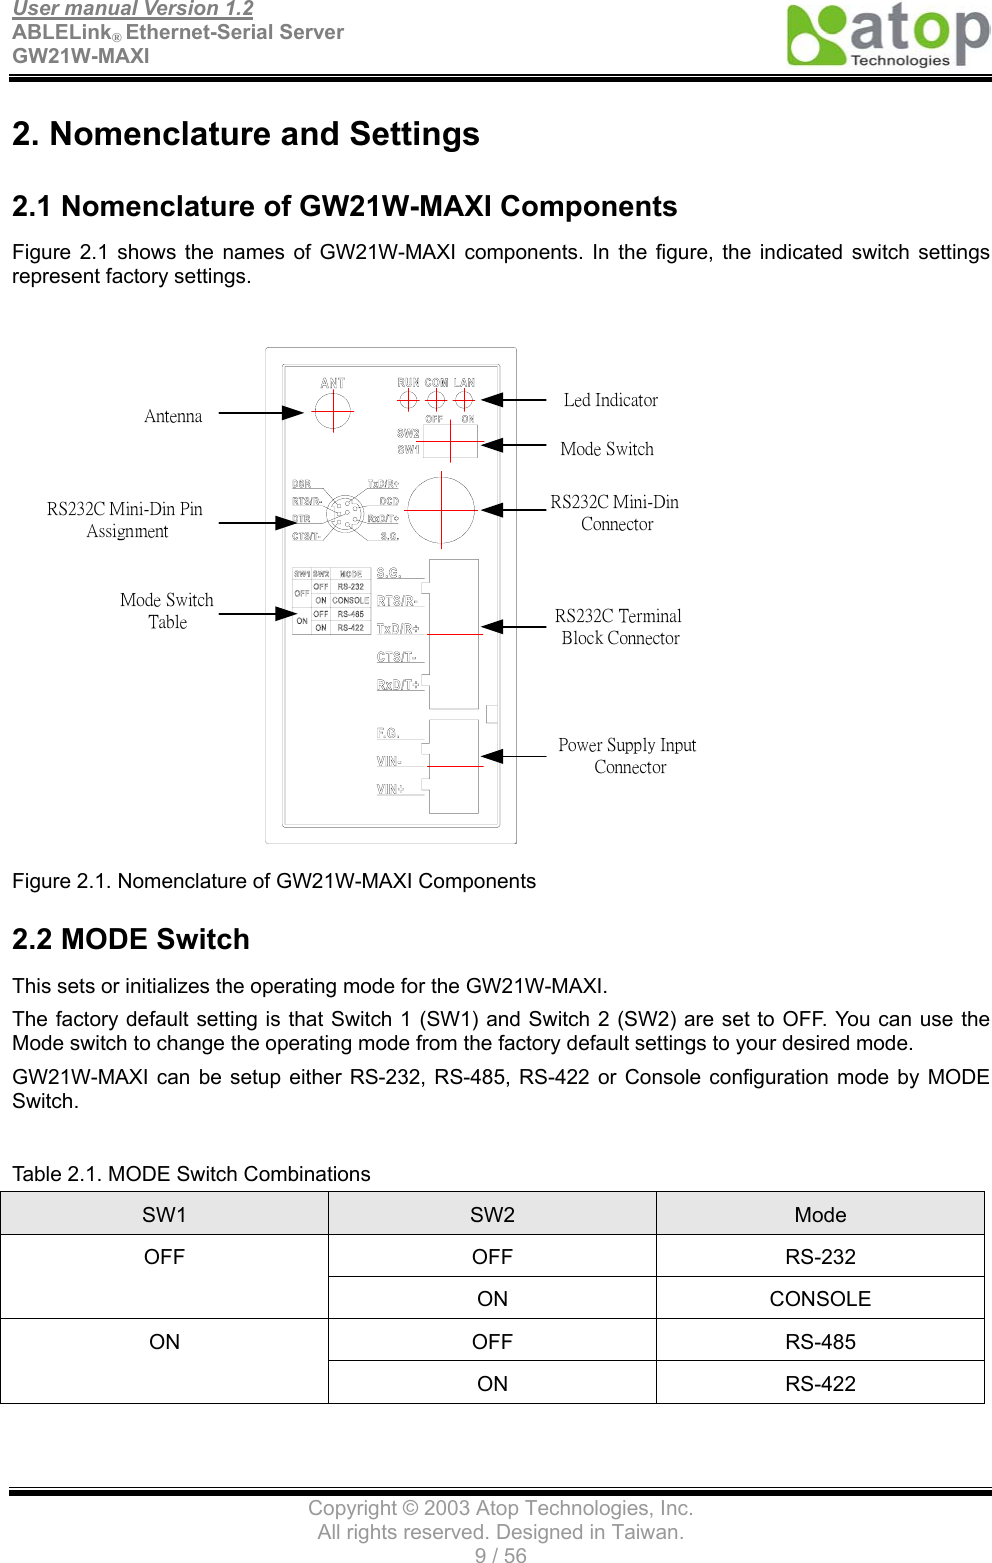 User manual Version 1.2 ABLELink® Ethernet-Serial Server   GW21W-MAXI                                      Copyright © 2003 Atop Technologies, Inc. All rights reserved. Designed in Taiwan. 9 / 56   2. Nomenclature and Settings 2.1 Nomenclature of GW21W-MAXI Components Figure 2.1 shows the names of GW21W-MAXI components. In the figure, the indicated switch settings represent factory settings. Led IndicatorRS232C Mini-Din ConnectorRS232C Terminal Block ConnectorPower Supply Input ConnectorAntennaRS232C Mini-Din Pin AssignmentMode Switch Table Mode Switch Figure 2.1. Nomenclature of GW21W-MAXI Components 2.2 MODE Switch This sets or initializes the operating mode for the GW21W-MAXI. The factory default setting is that Switch 1 (SW1) and Switch 2 (SW2) are set to OFF. You can use the Mode switch to change the operating mode from the factory default settings to your desired mode. GW21W-MAXI can be setup either RS-232, RS-485, RS-422 or Console configuration mode by MODE Switch.  Table 2.1. MODE Switch Combinations SW1  SW2  Mode OFF RS-232 OFF ON CONSOLE OFF RS-485 ON ON RS-422 